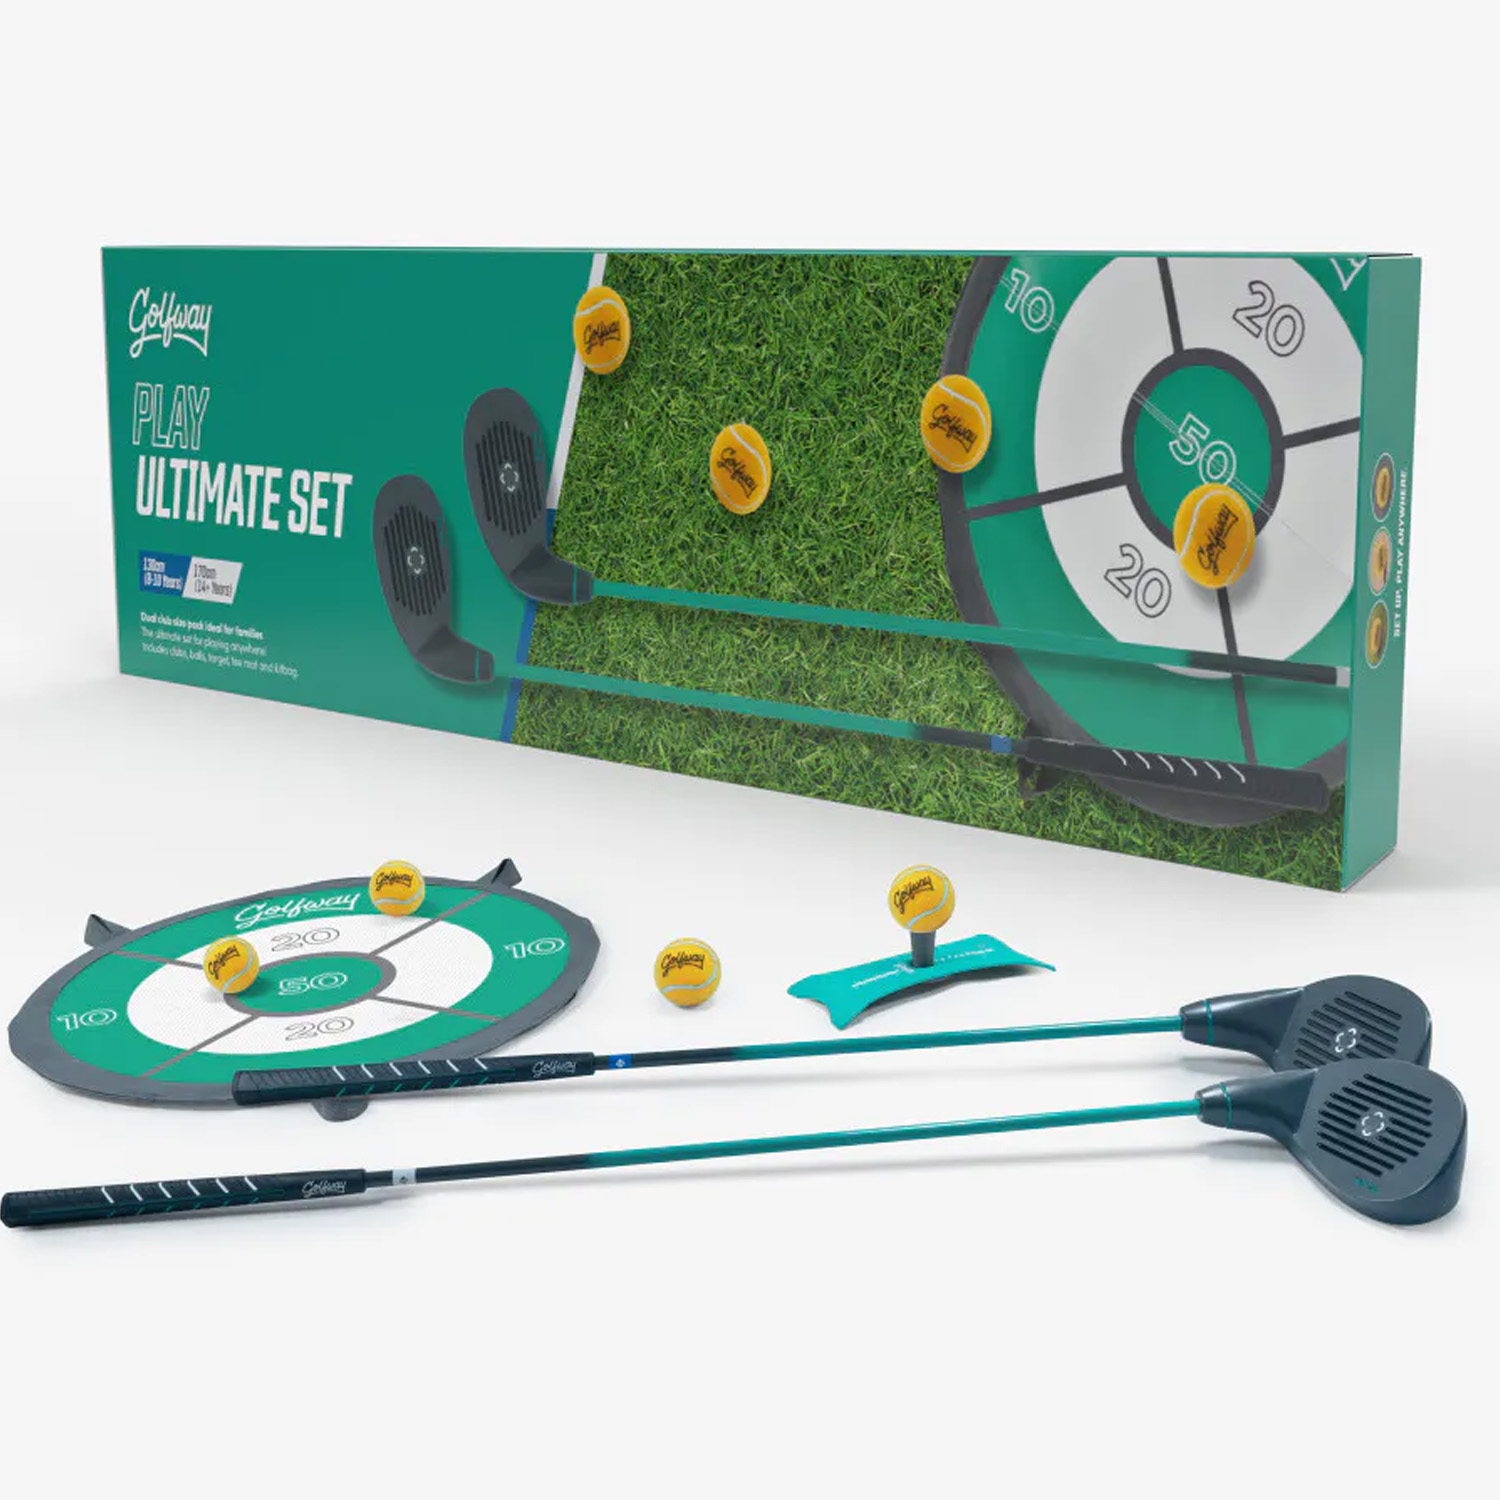 Golfway Play at Home Golf Practice Set